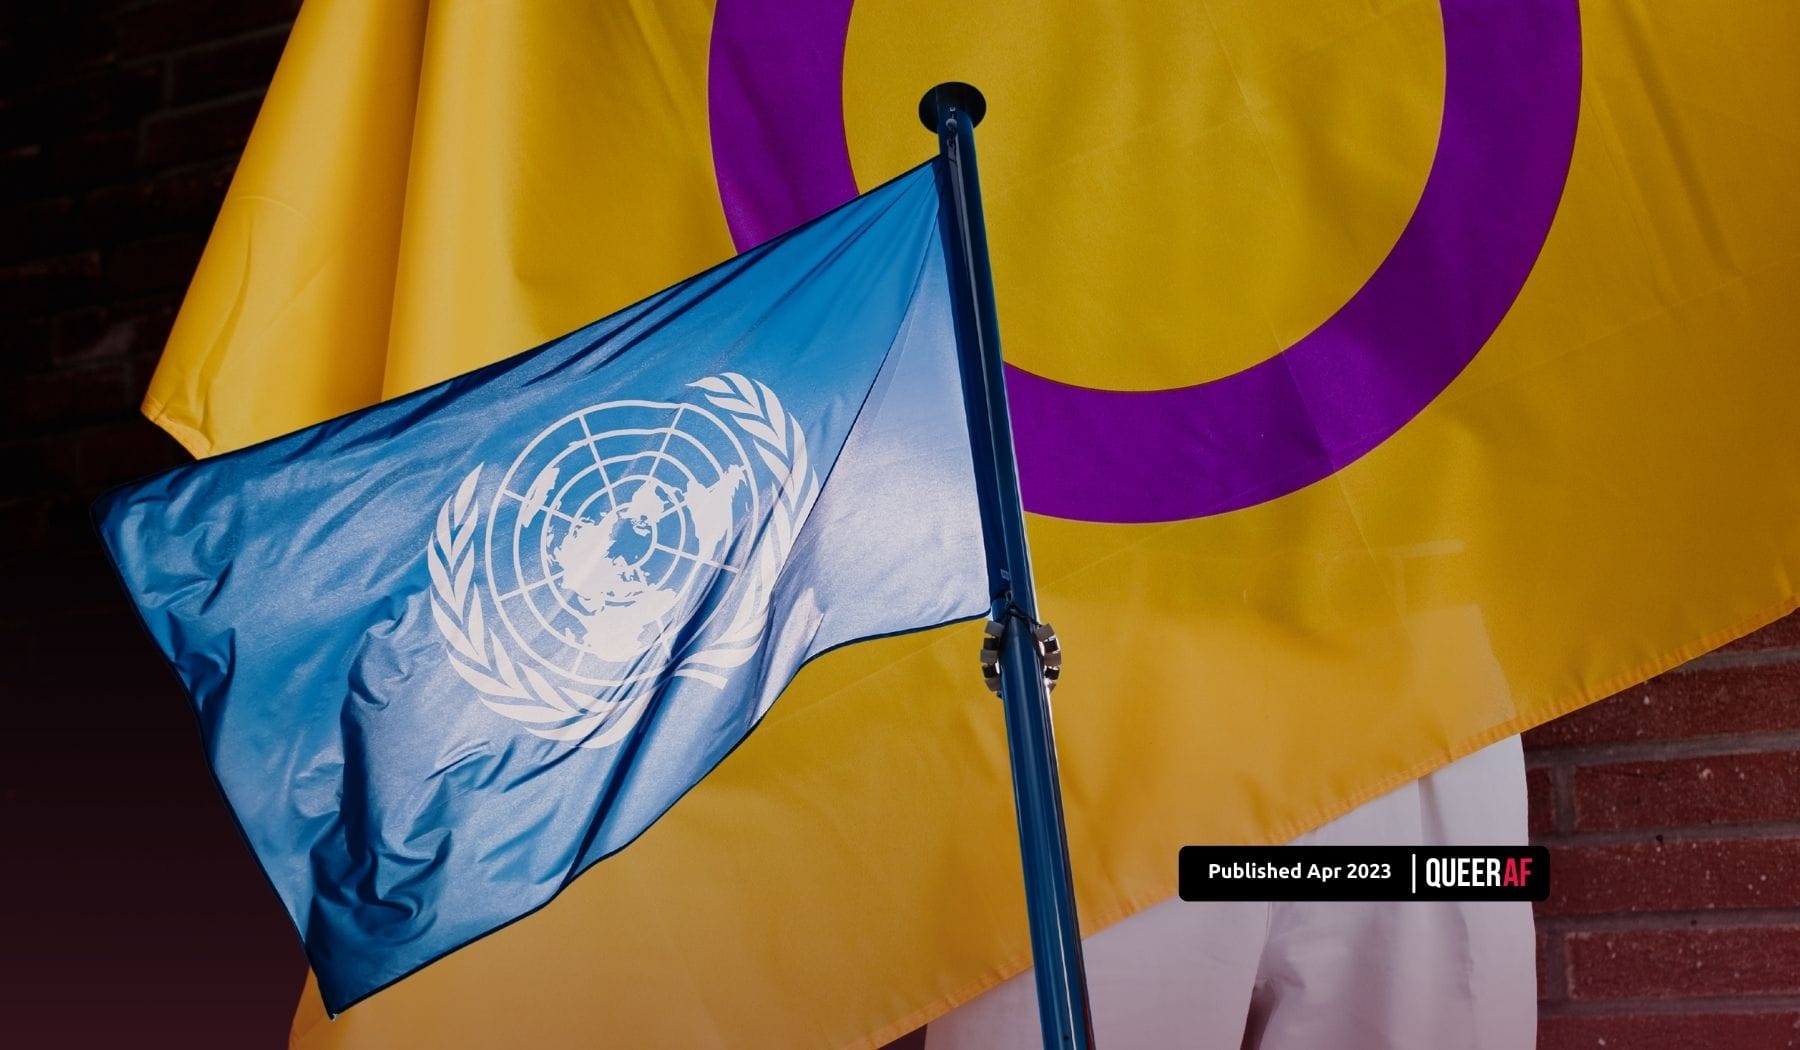 Why a landmark UN resolution about Intersex people's lives is so important